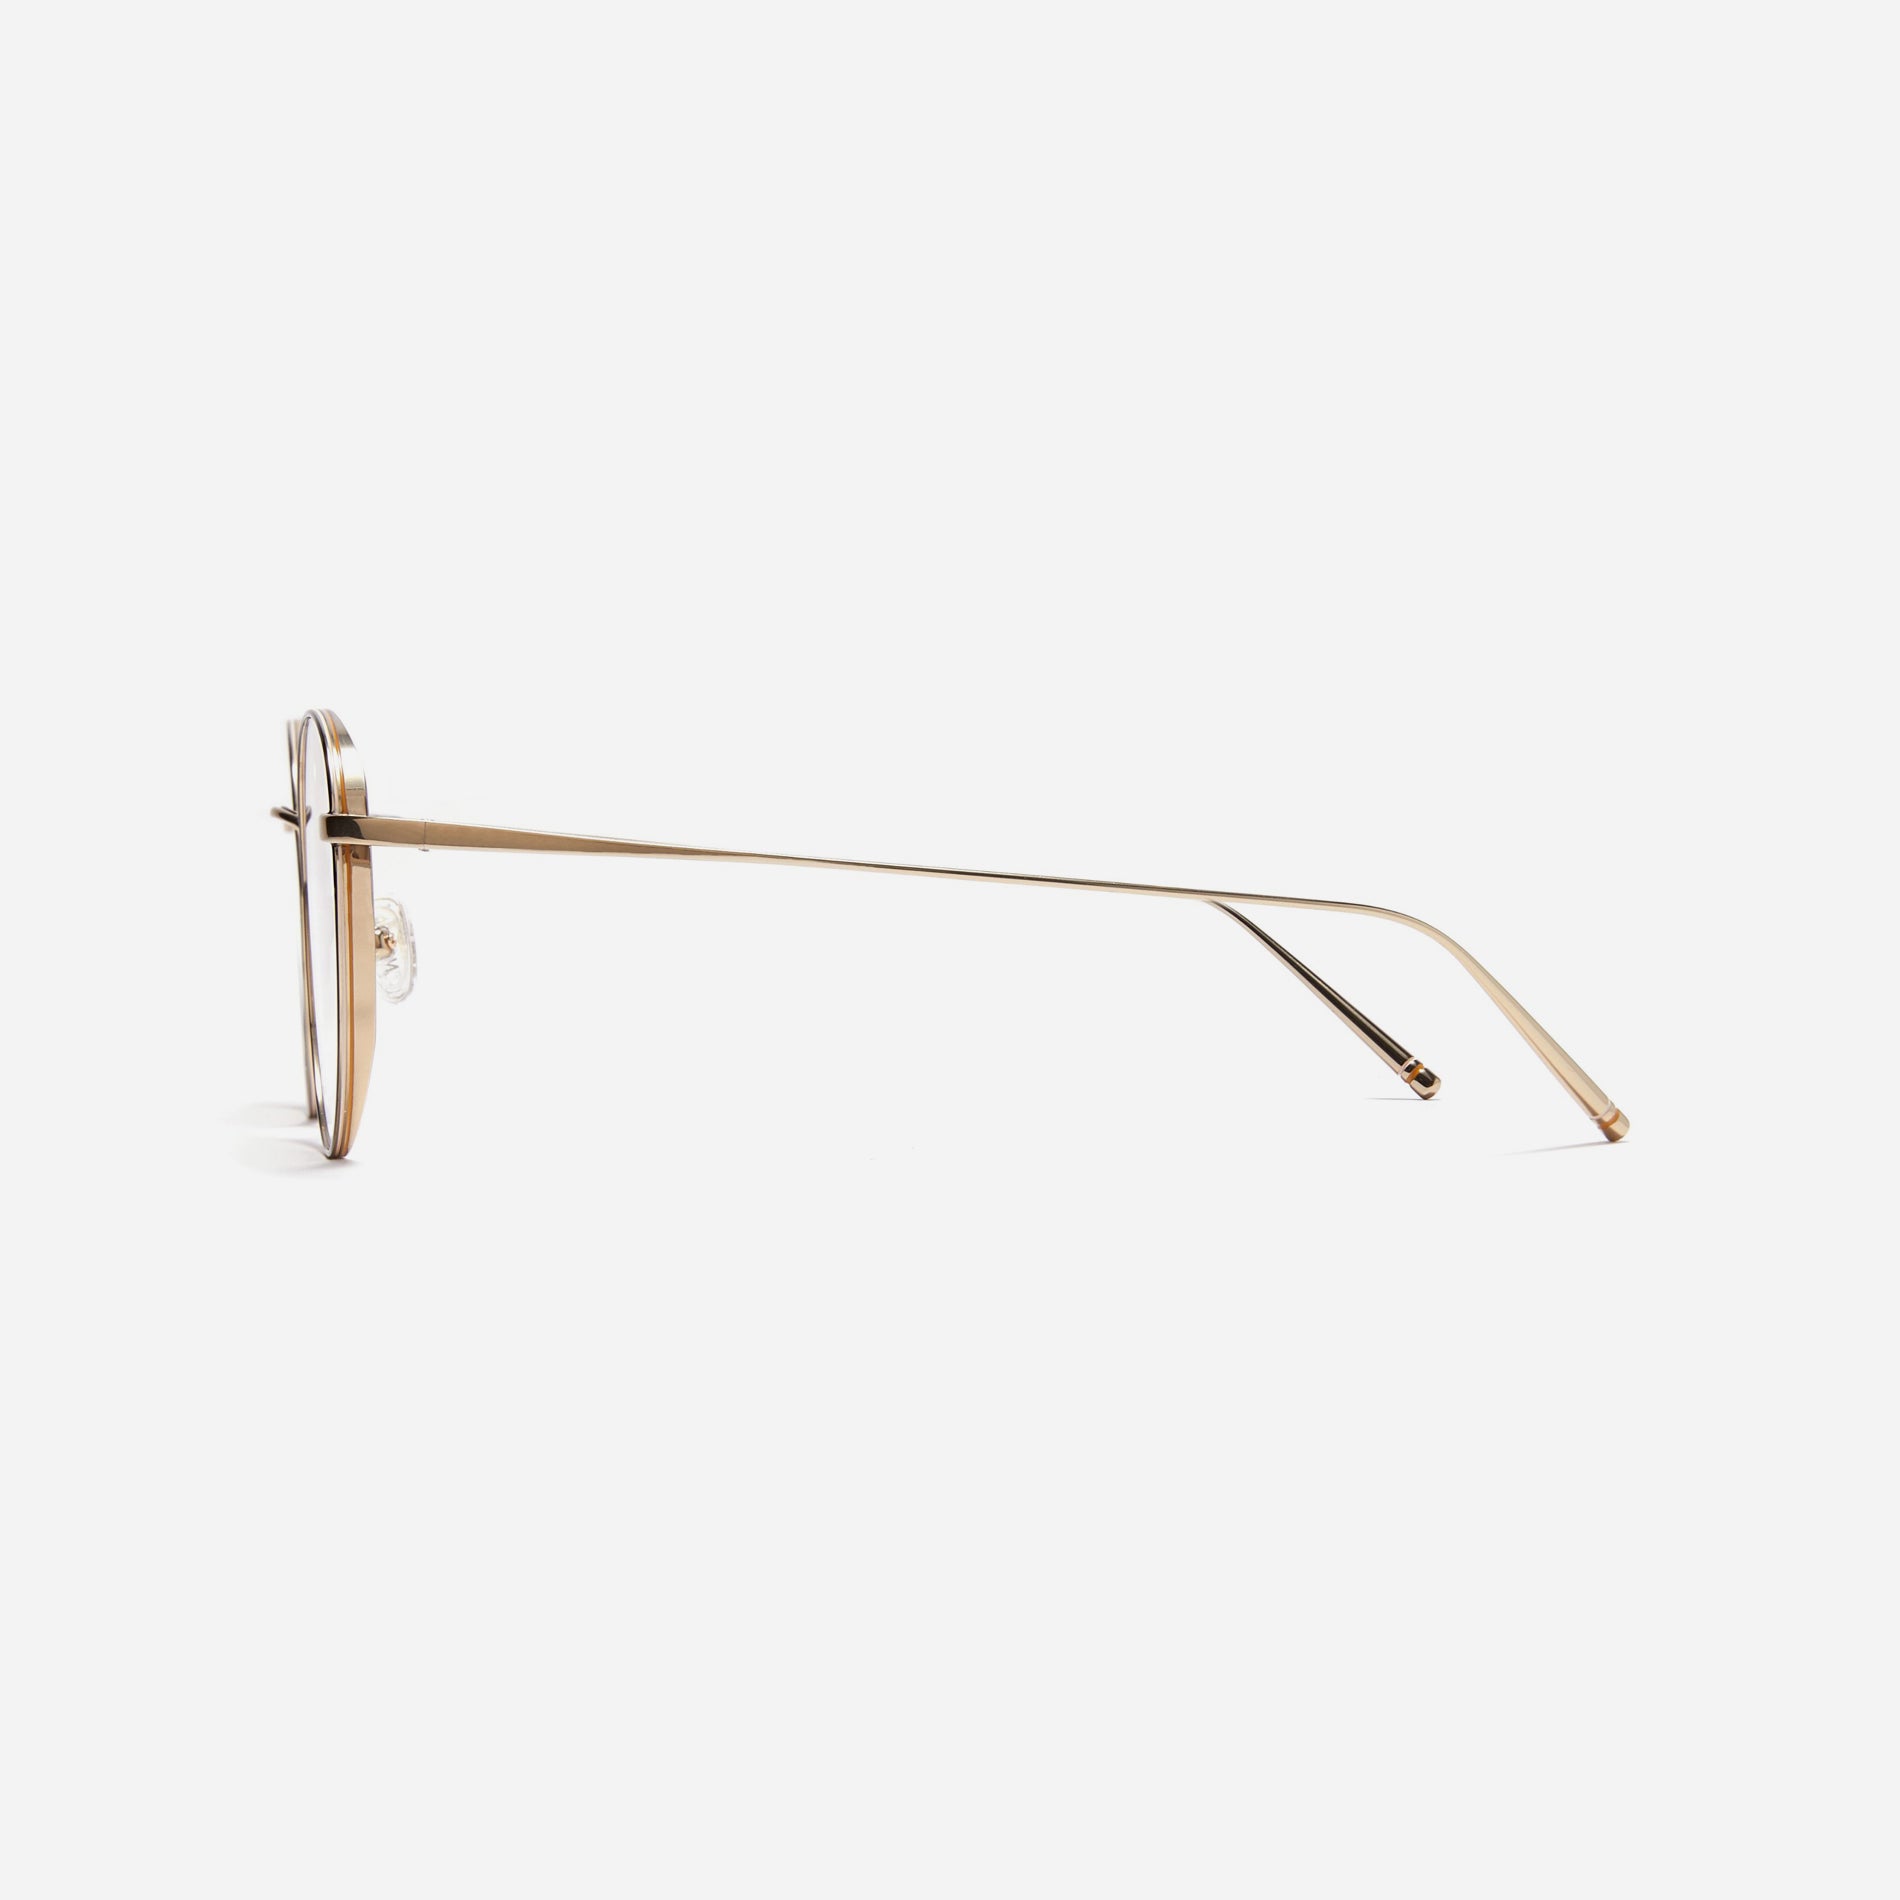 Round-shaped, full-metal eyeglasses with a dual-rim structure designed to accommodate thicker, high-prescription lenses. Both the frame and temples are made of pure titanium, ensuring a lightweight and comfortable fit.